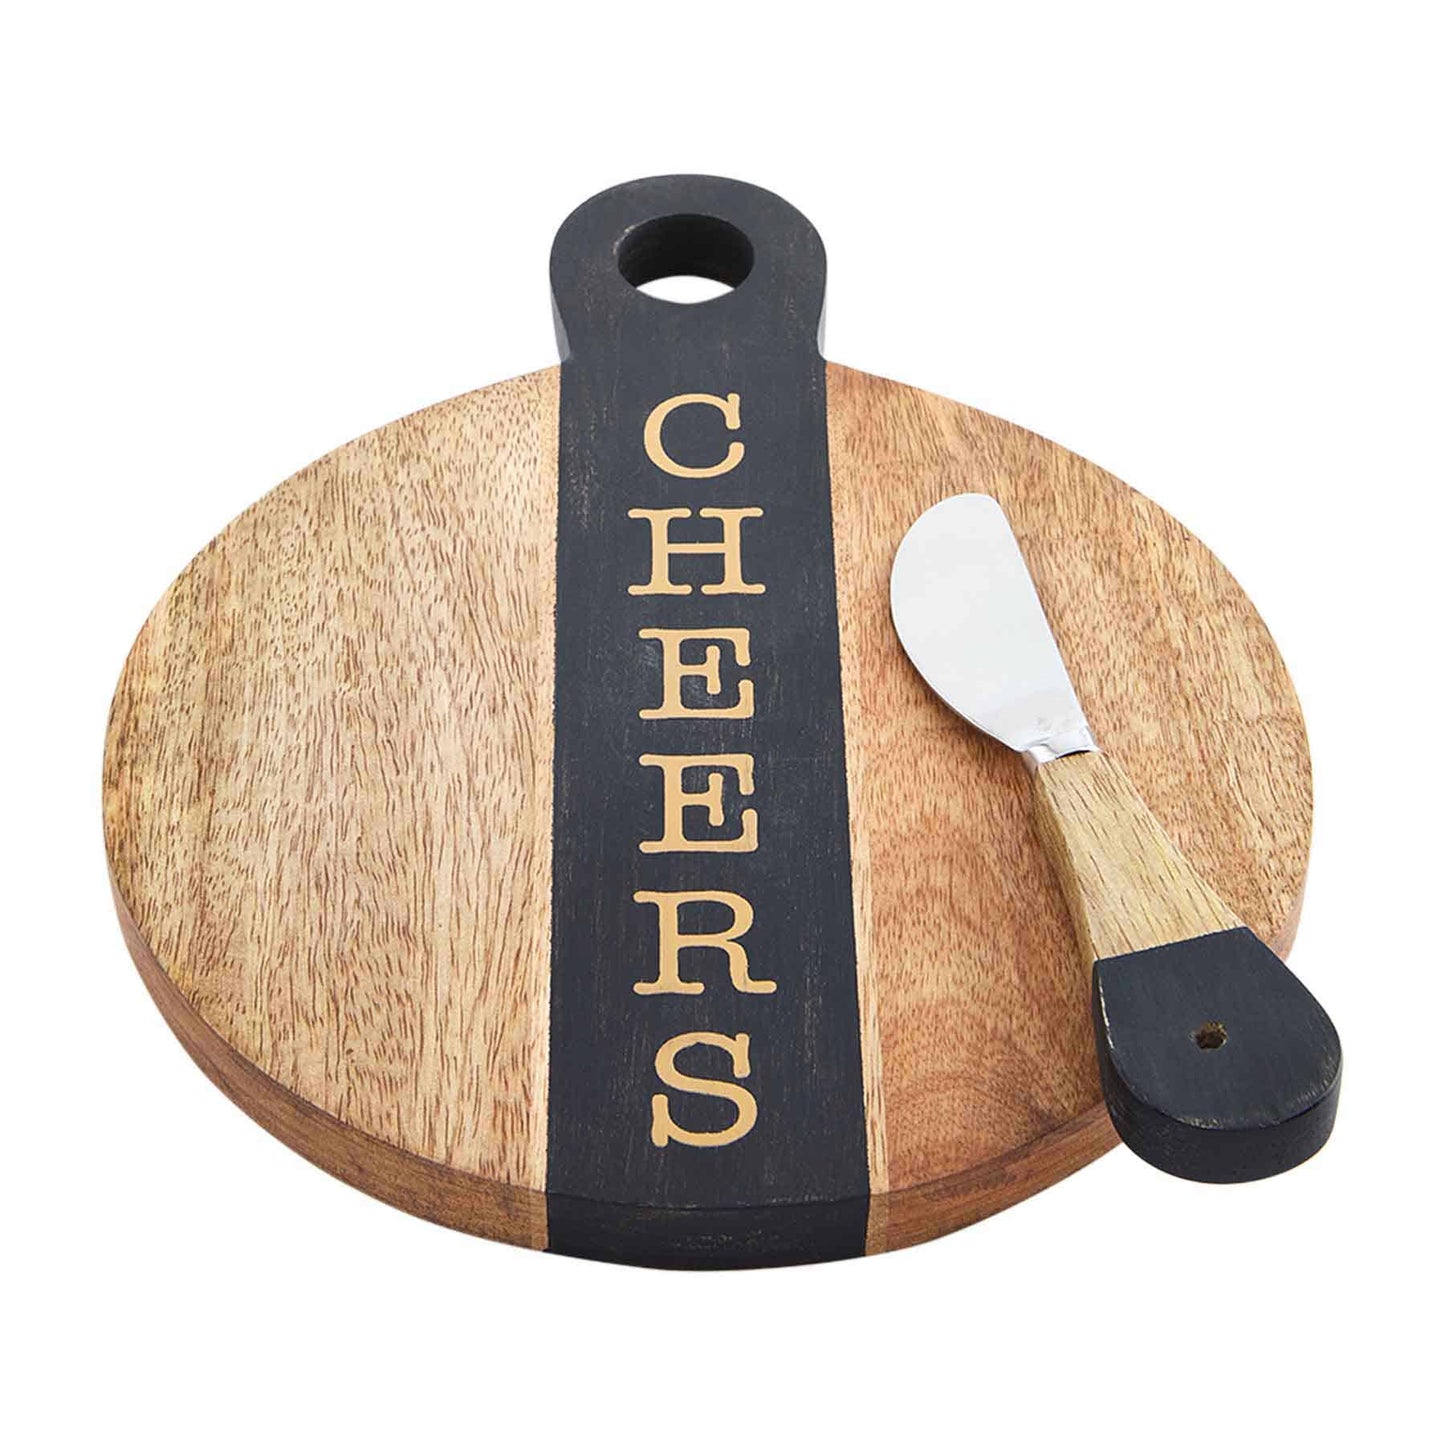 "cheers" board and spreader on a white background.